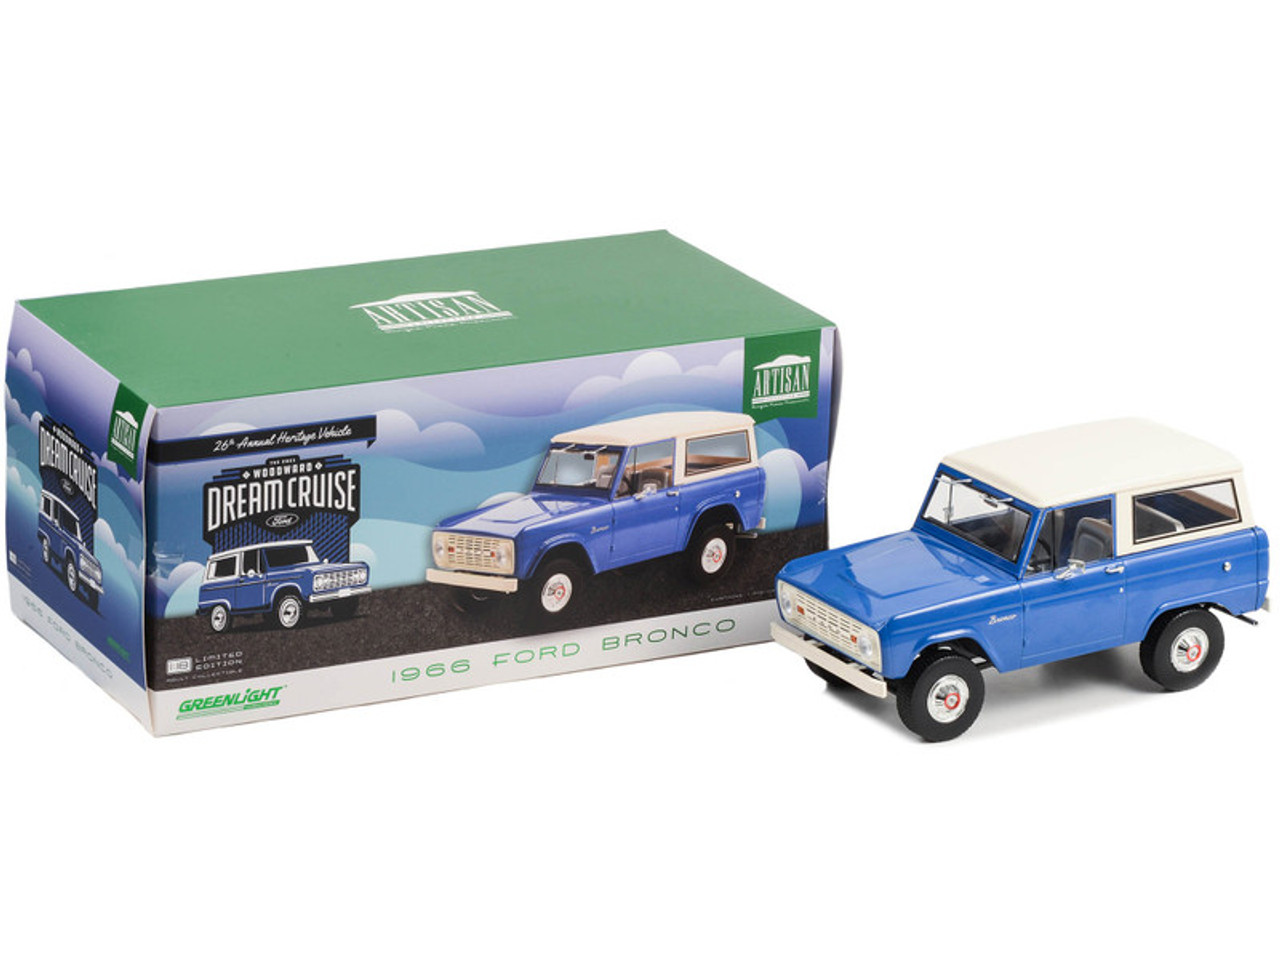 1966 Ford Bronco Blue with Cream Top "26th Annual Woodward Dream Cruise Featured Heritage Vehicle" "Artisan Collection" 1/18 Diecast Model Car by Greenlight